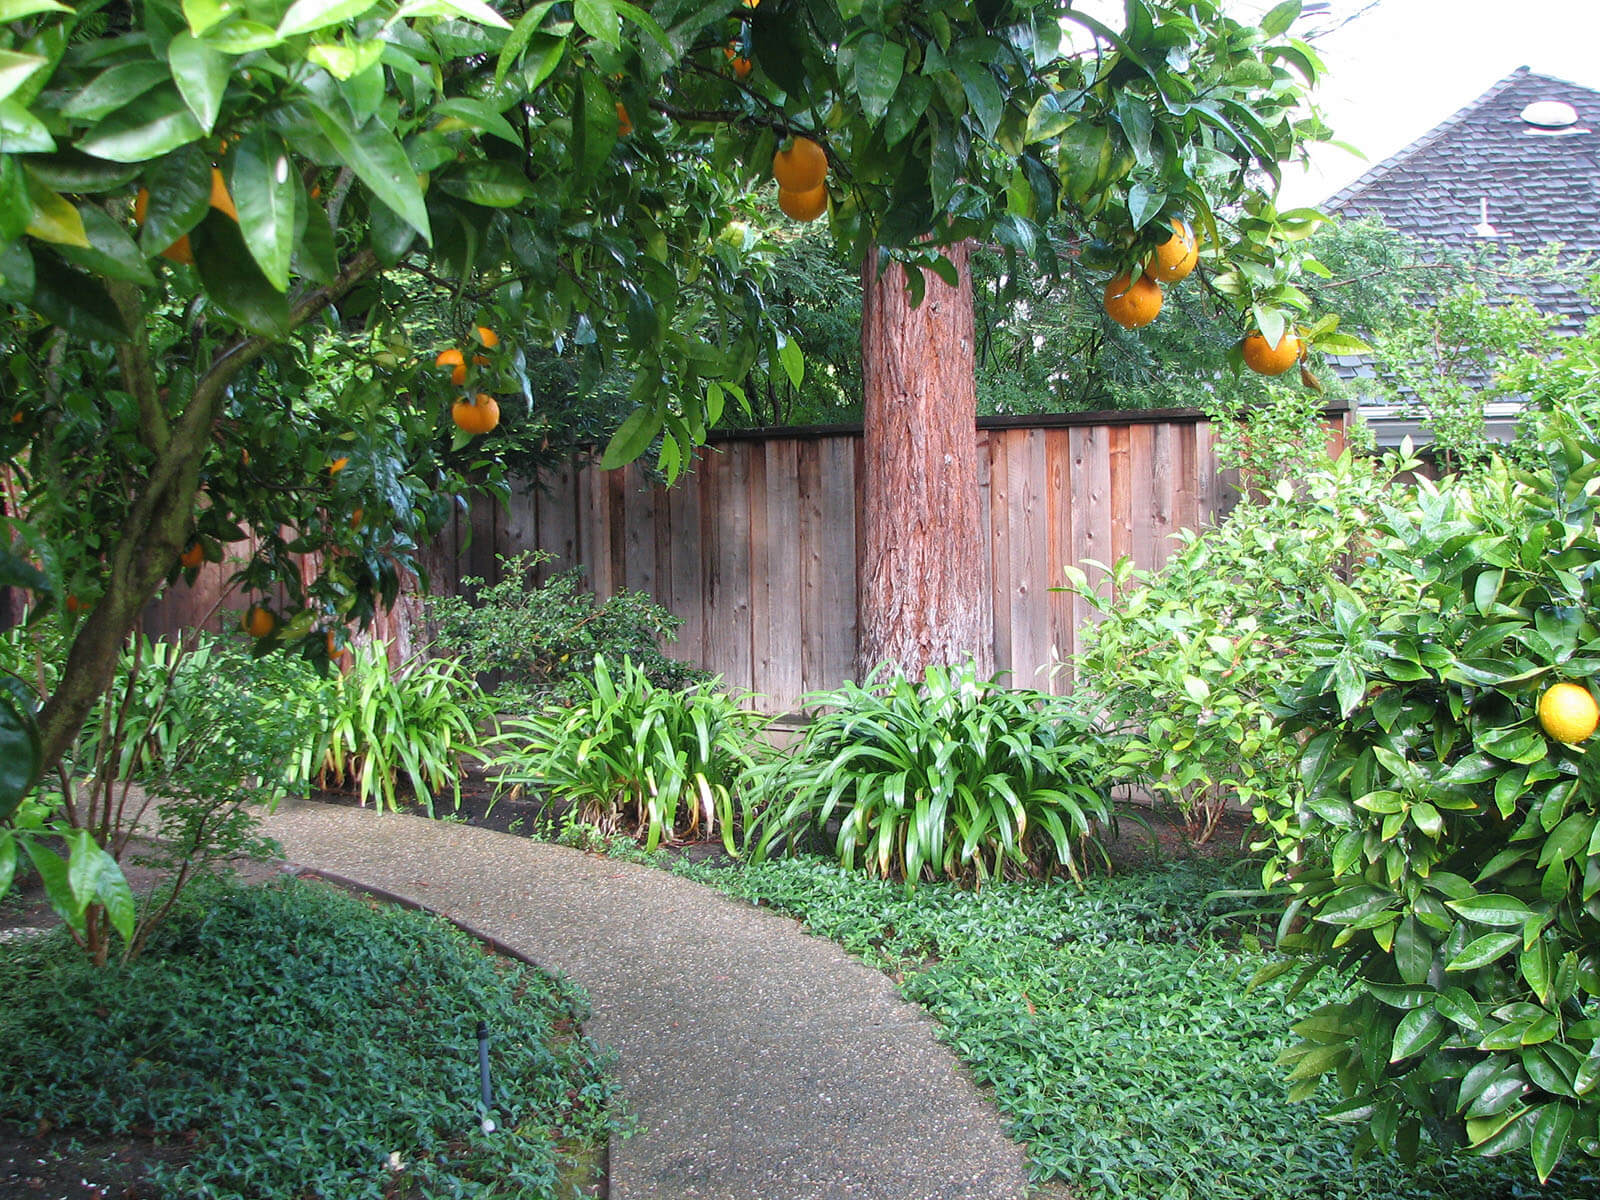 Shaded fruiting tree area with stone and gravel walkway going through the yard